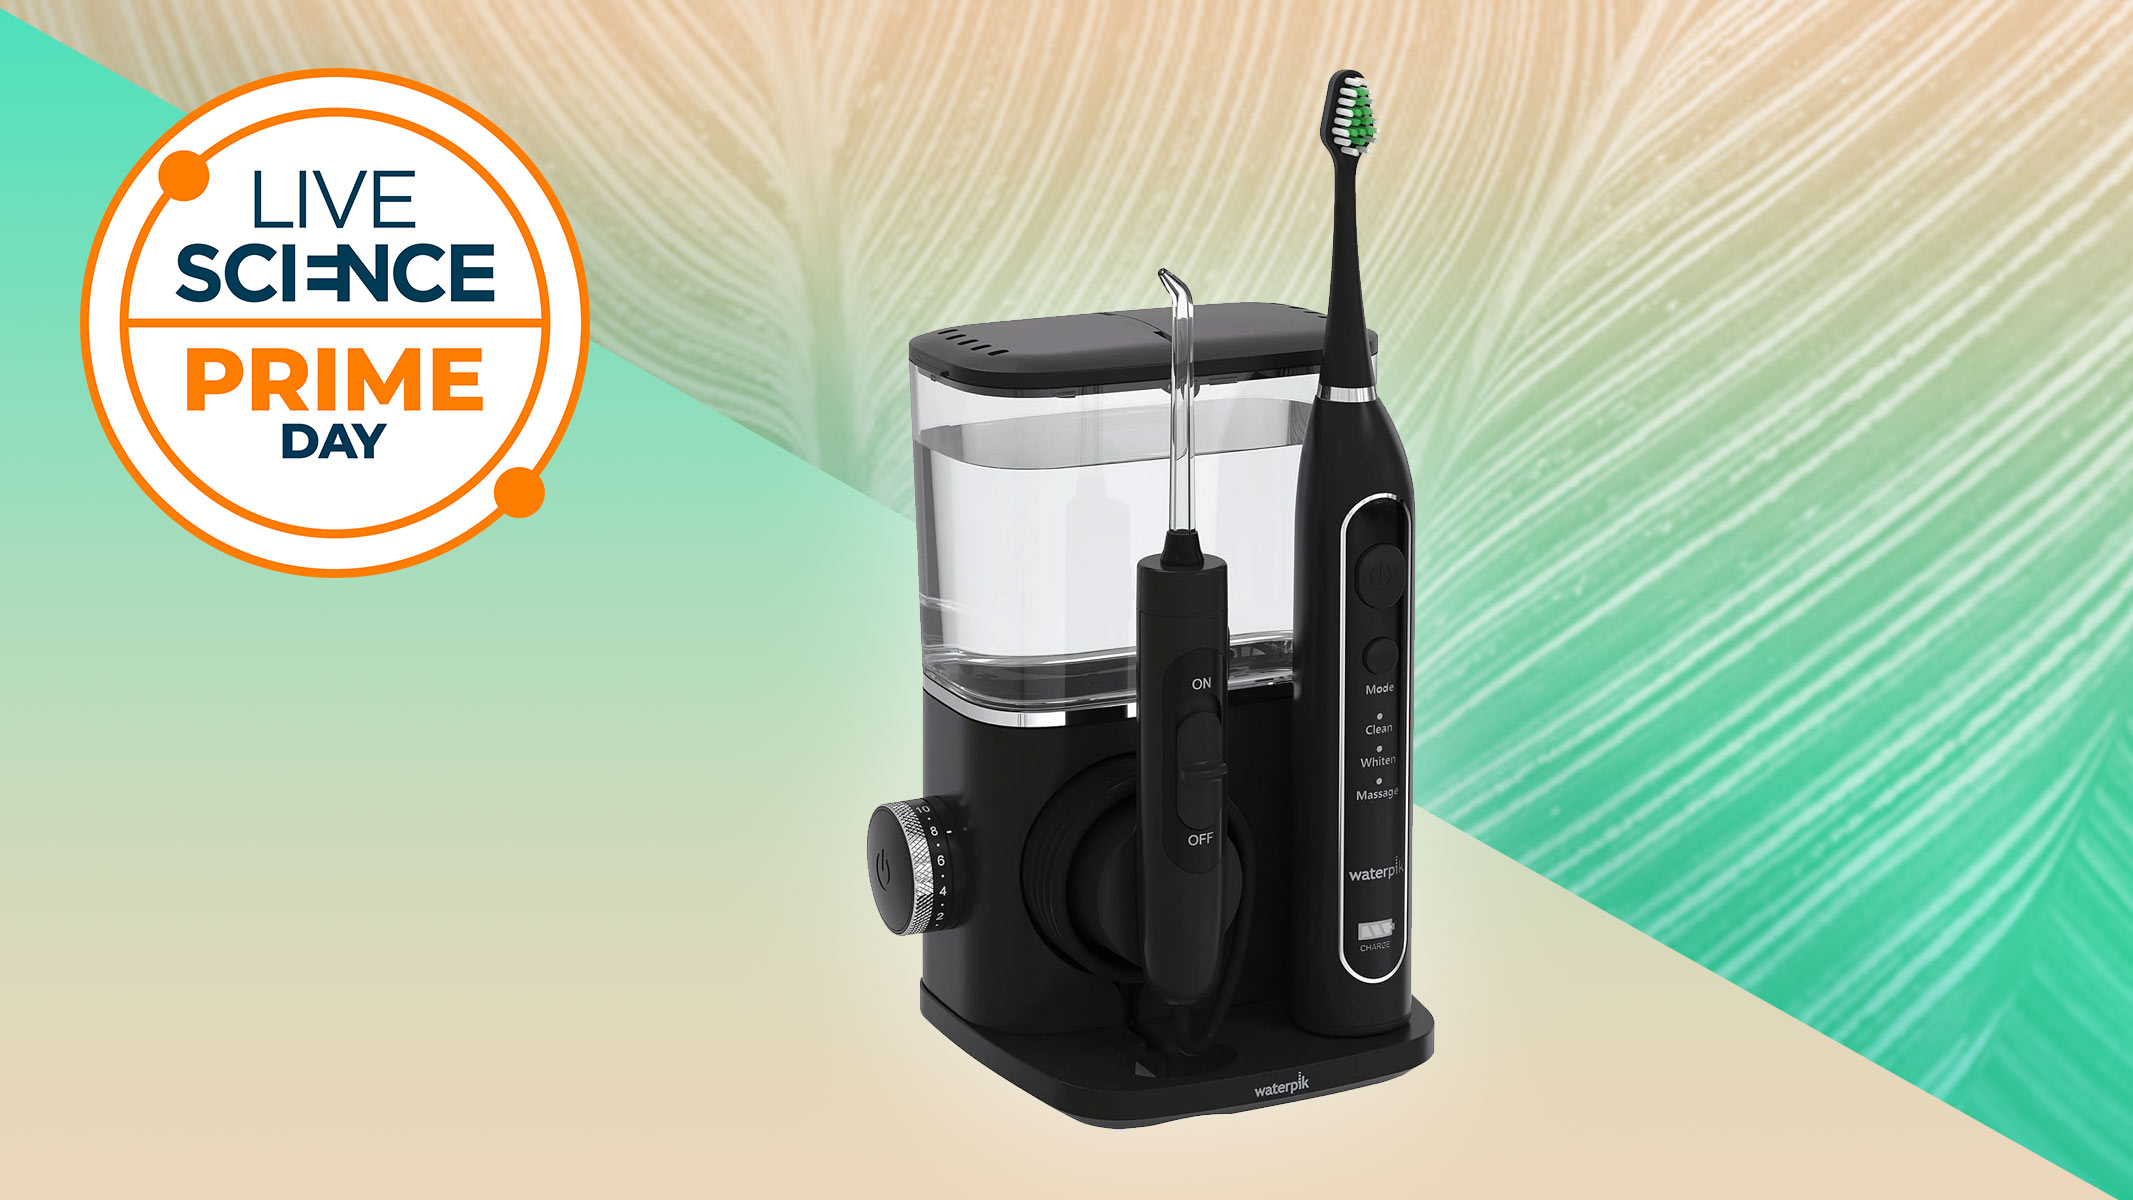  Save $80 on the best electric toothbrush and water flosser set 